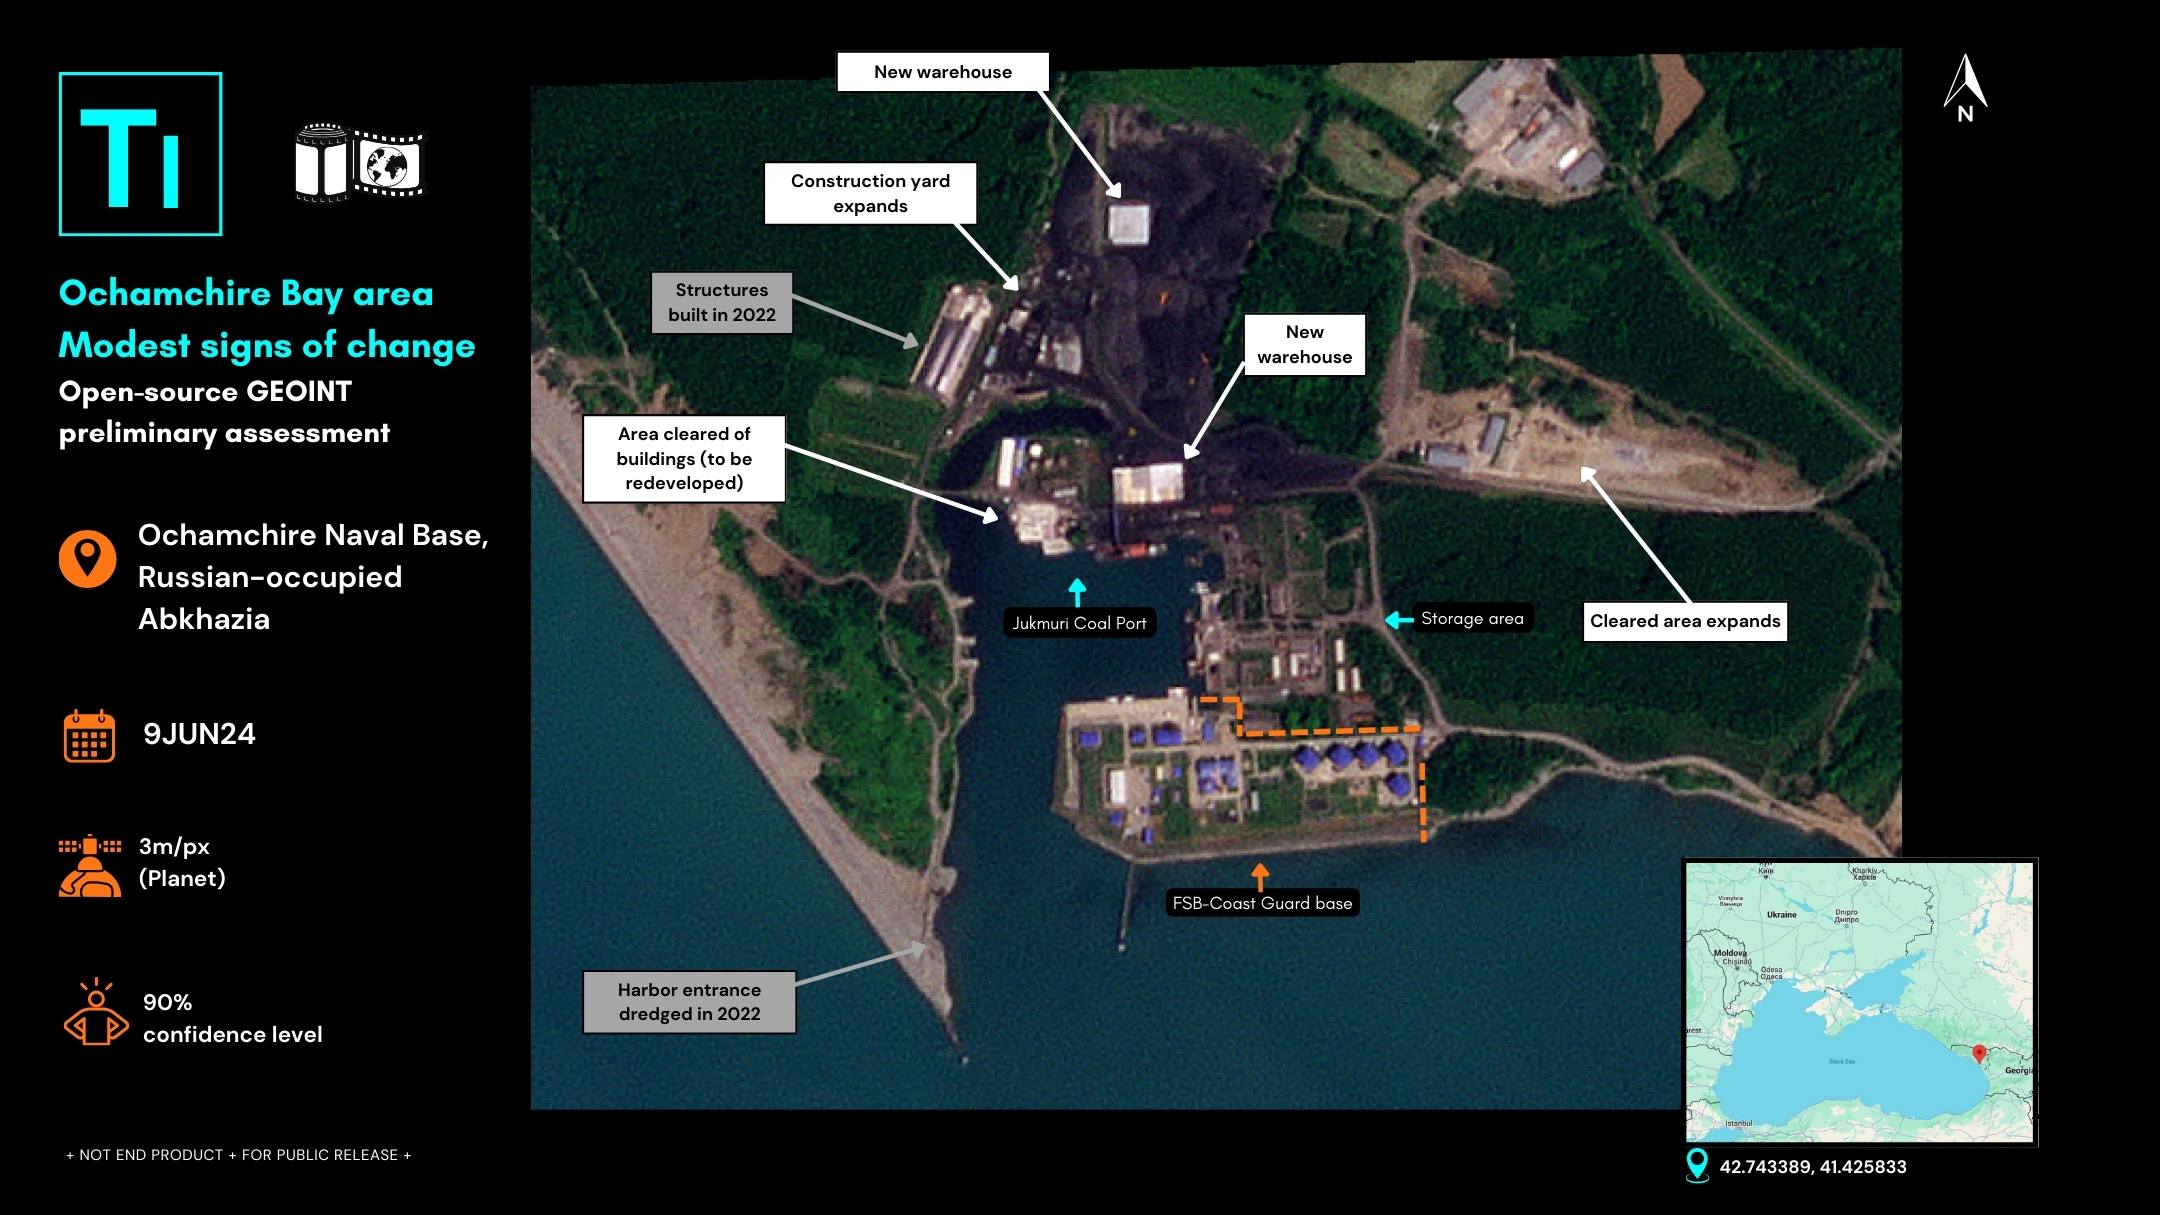 Russia’s Black Sea Activities: Ochamchire Bay in Abkhazia Shows Signs of Expansion (OS/GEOINT)